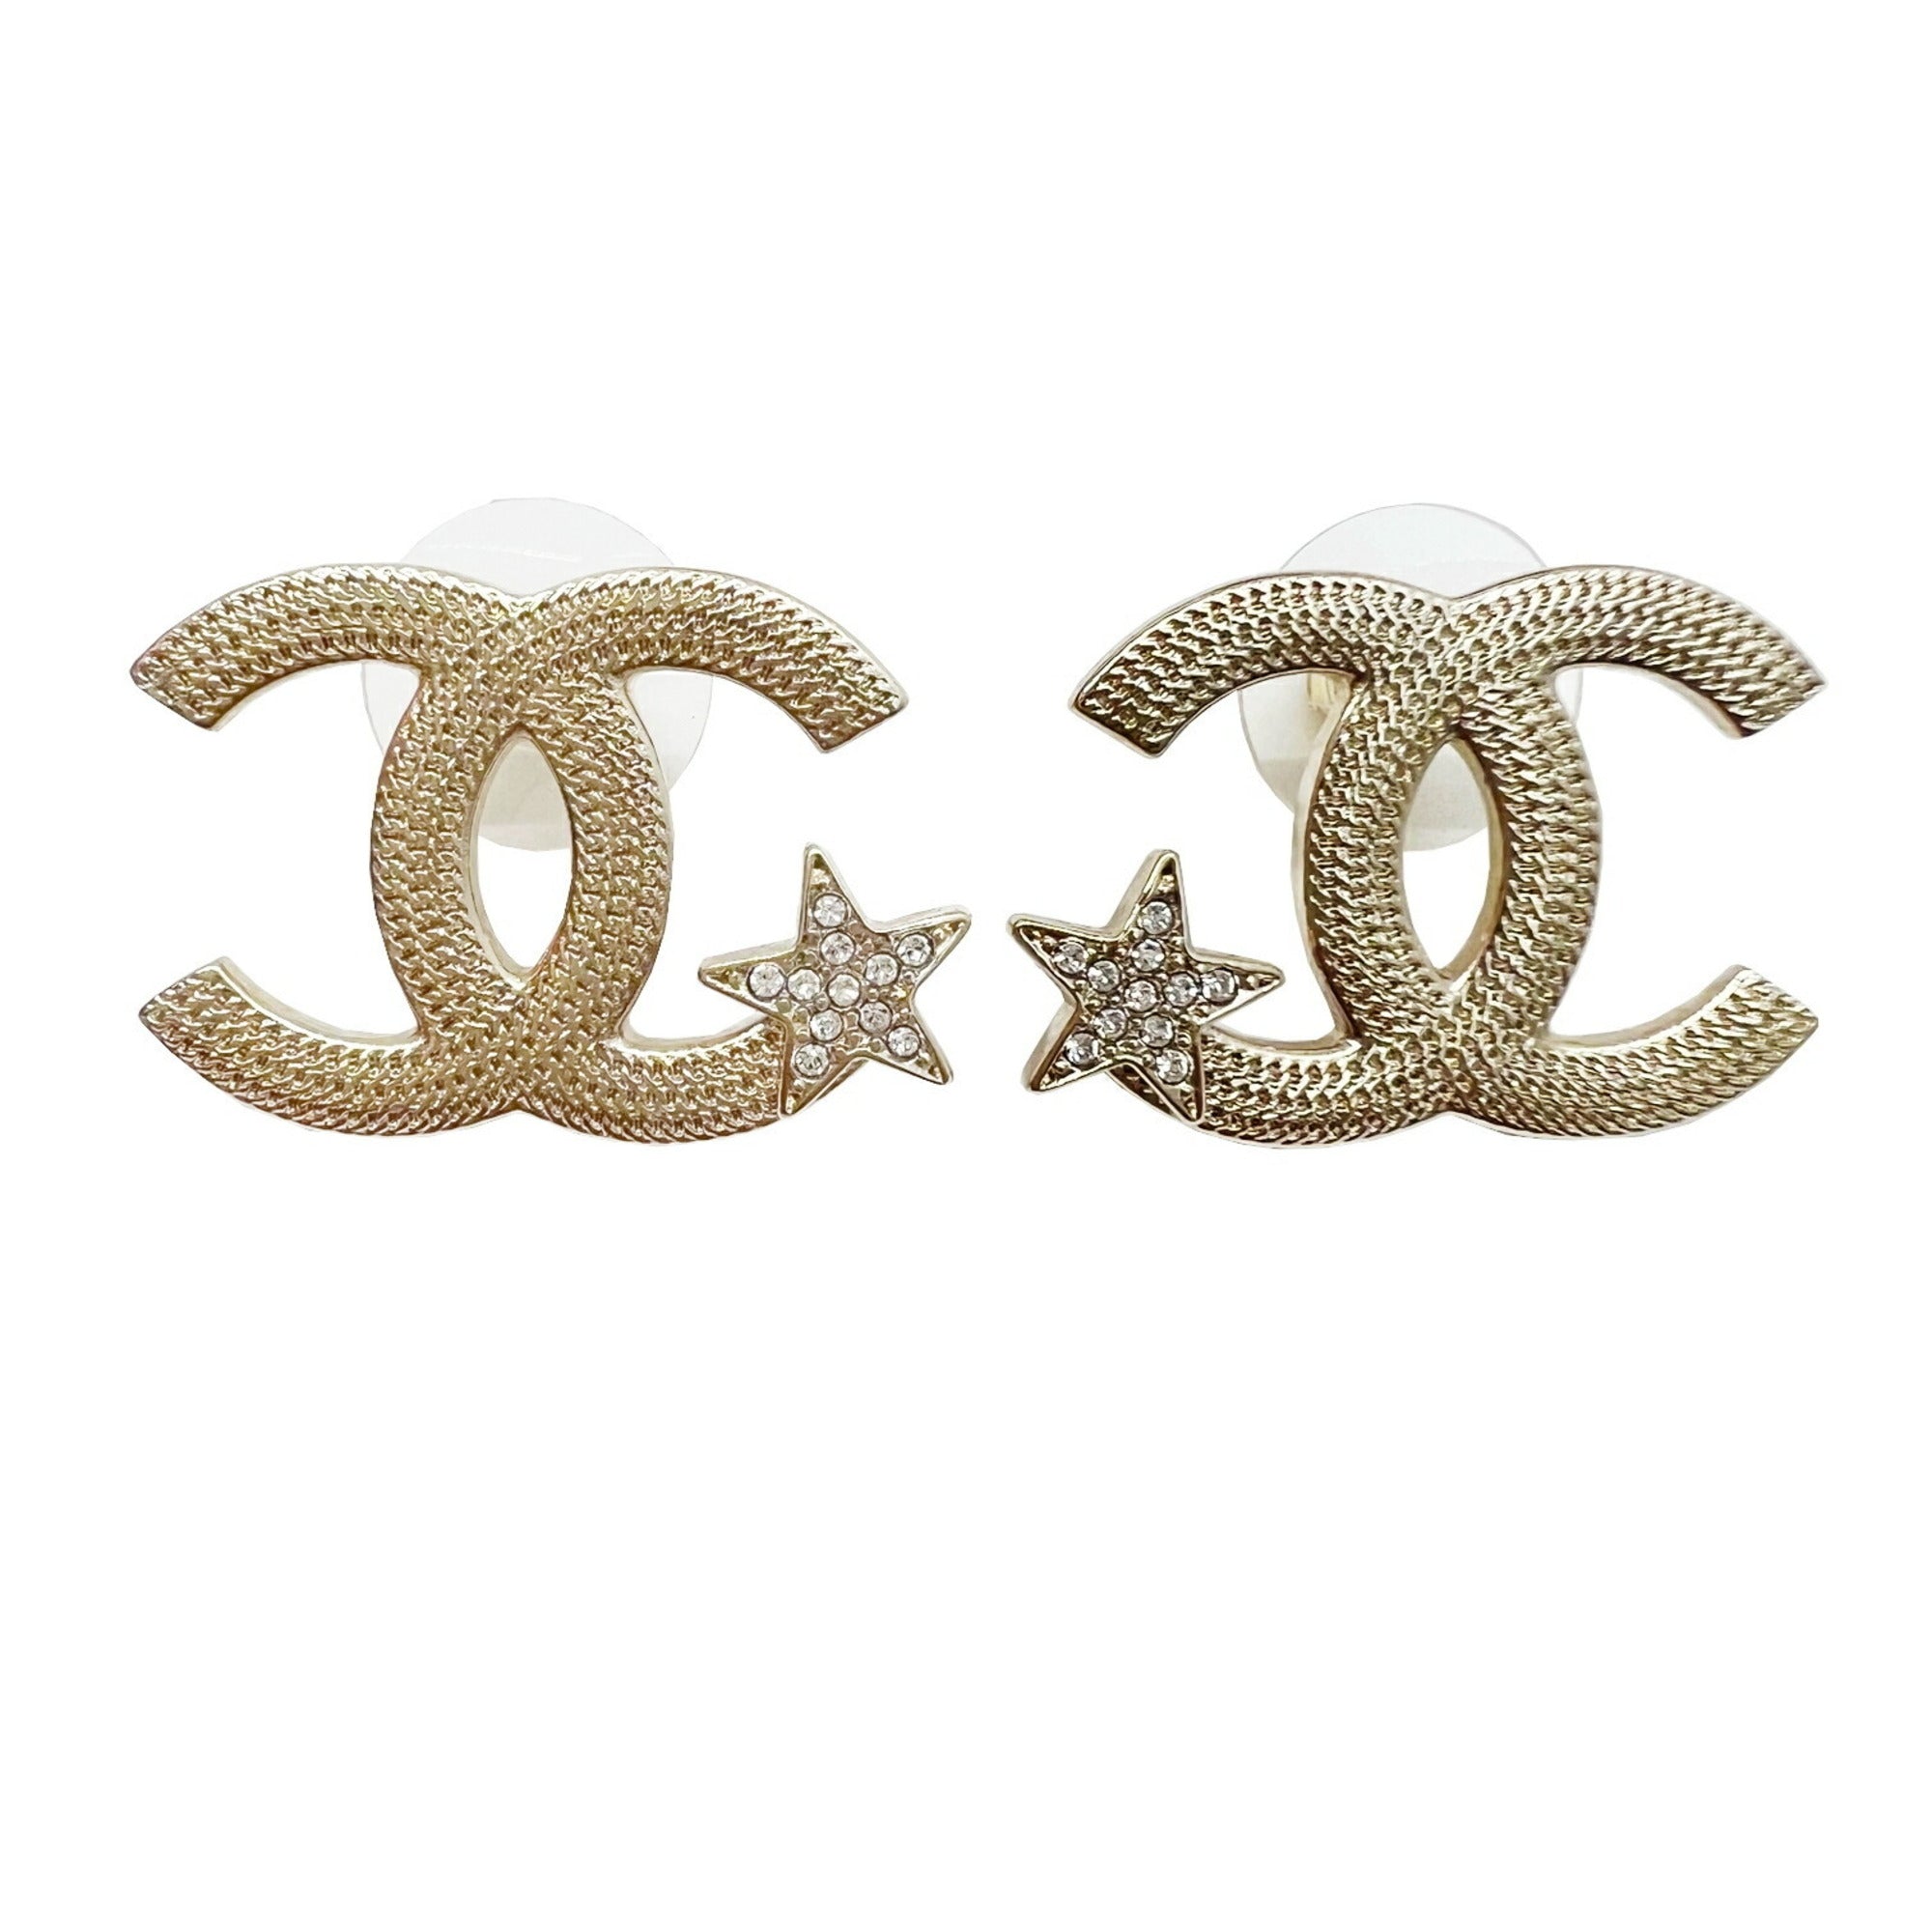 CHANEL, Jewelry, Chanel 23c Gold Crystal Heart Cc Logo Valentines Earrings  New Wtags Receipt